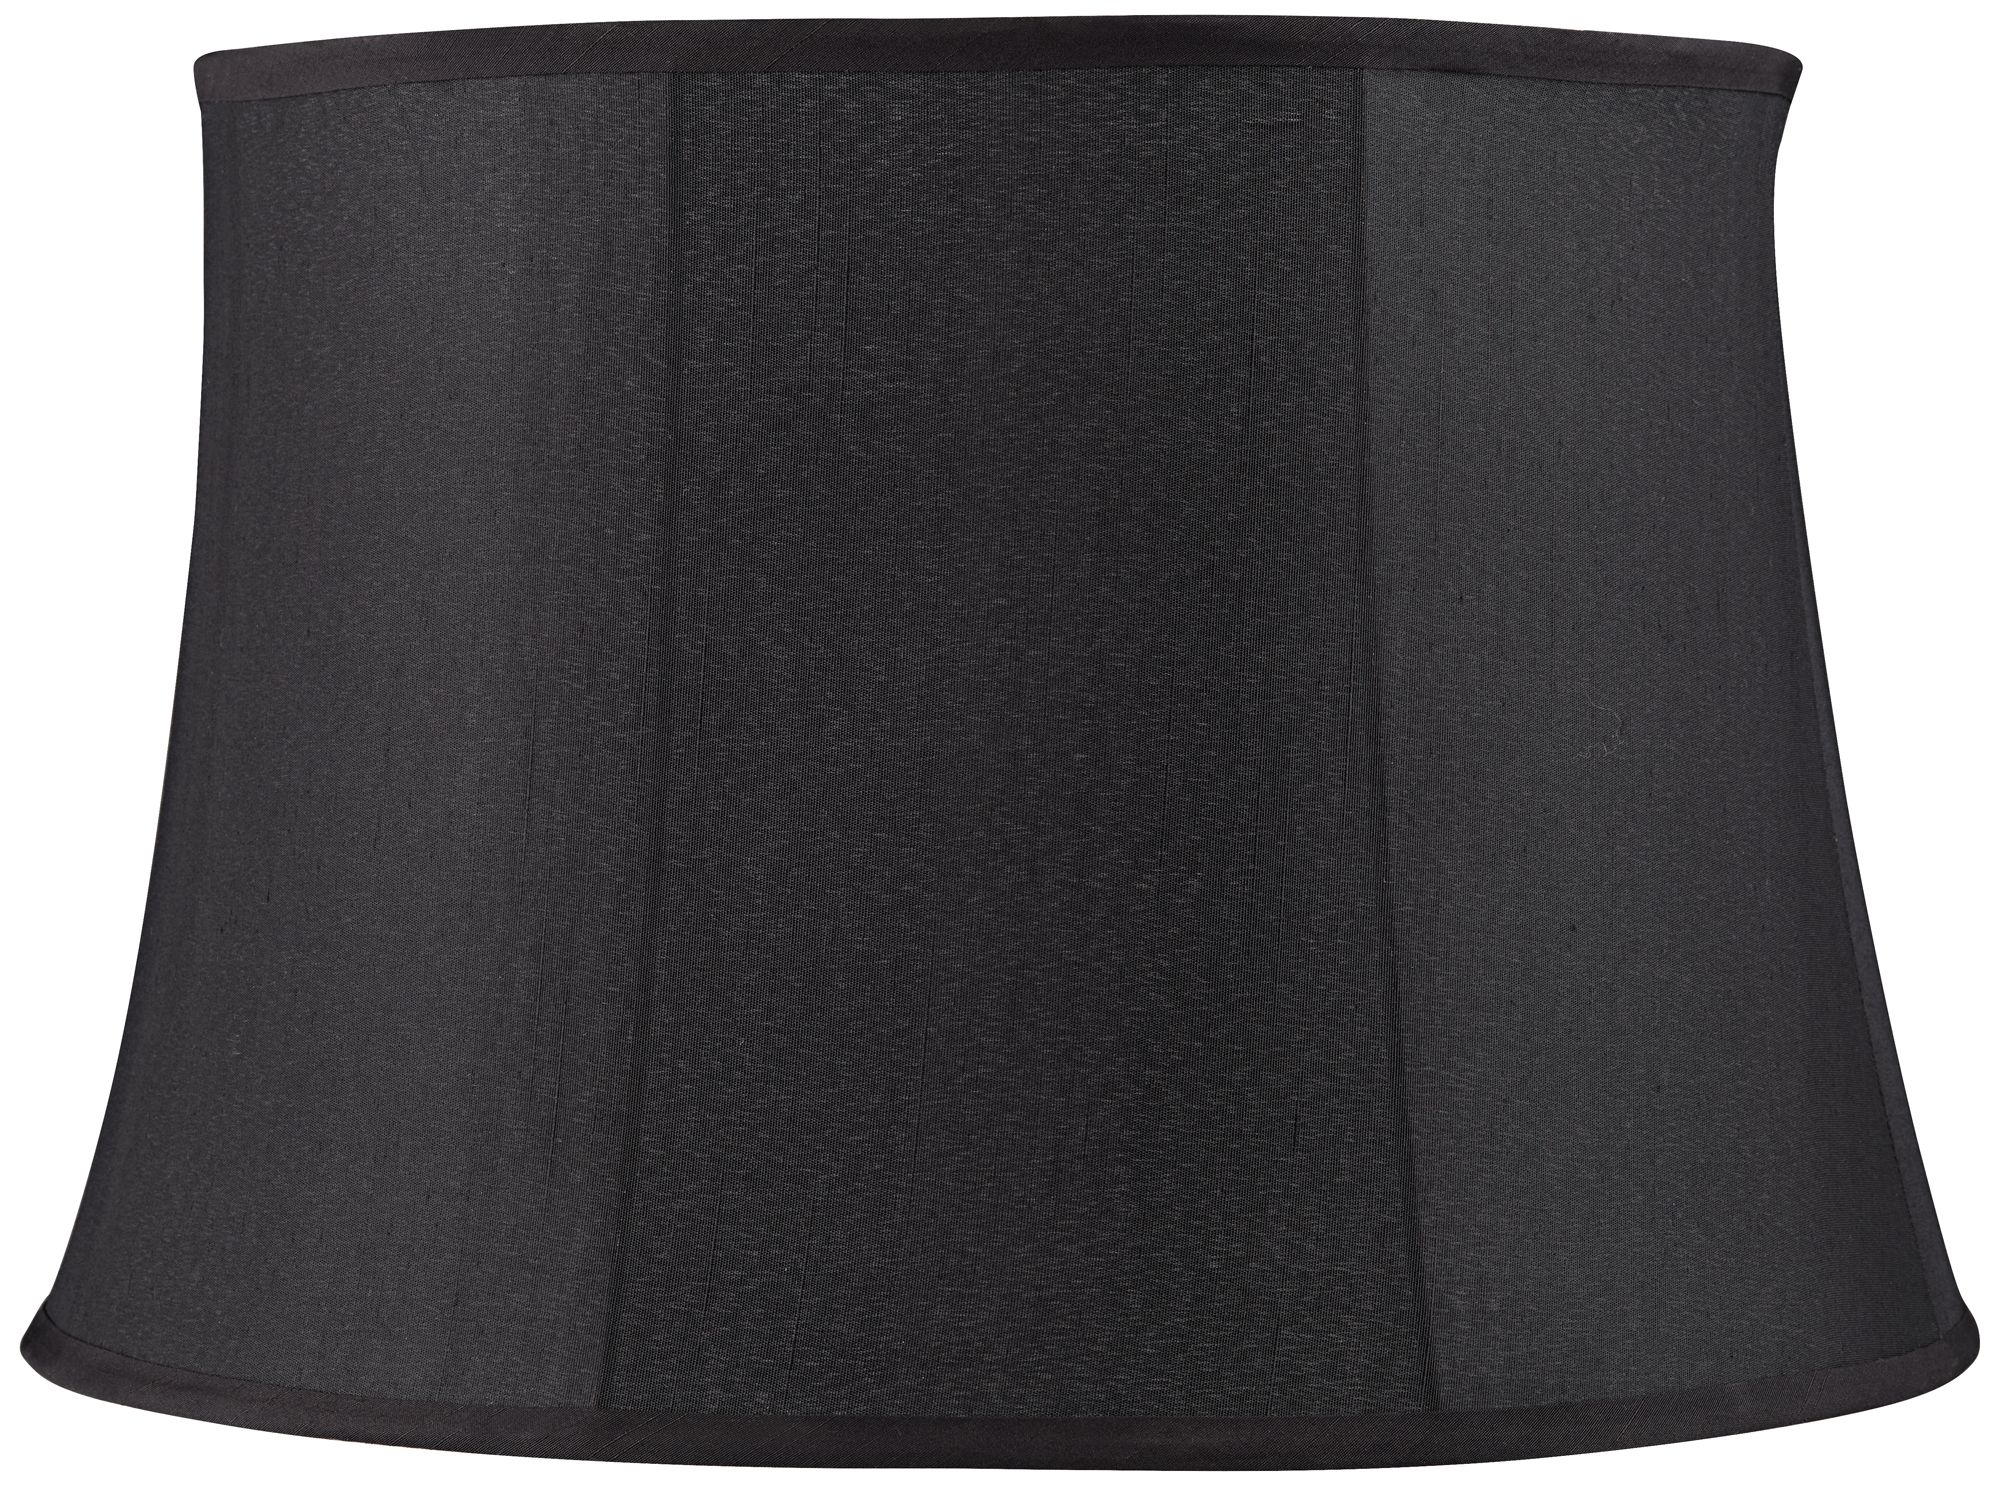 Black Faux Silk Tapered Drum Lamp Shade 15x18x12 (Spider)